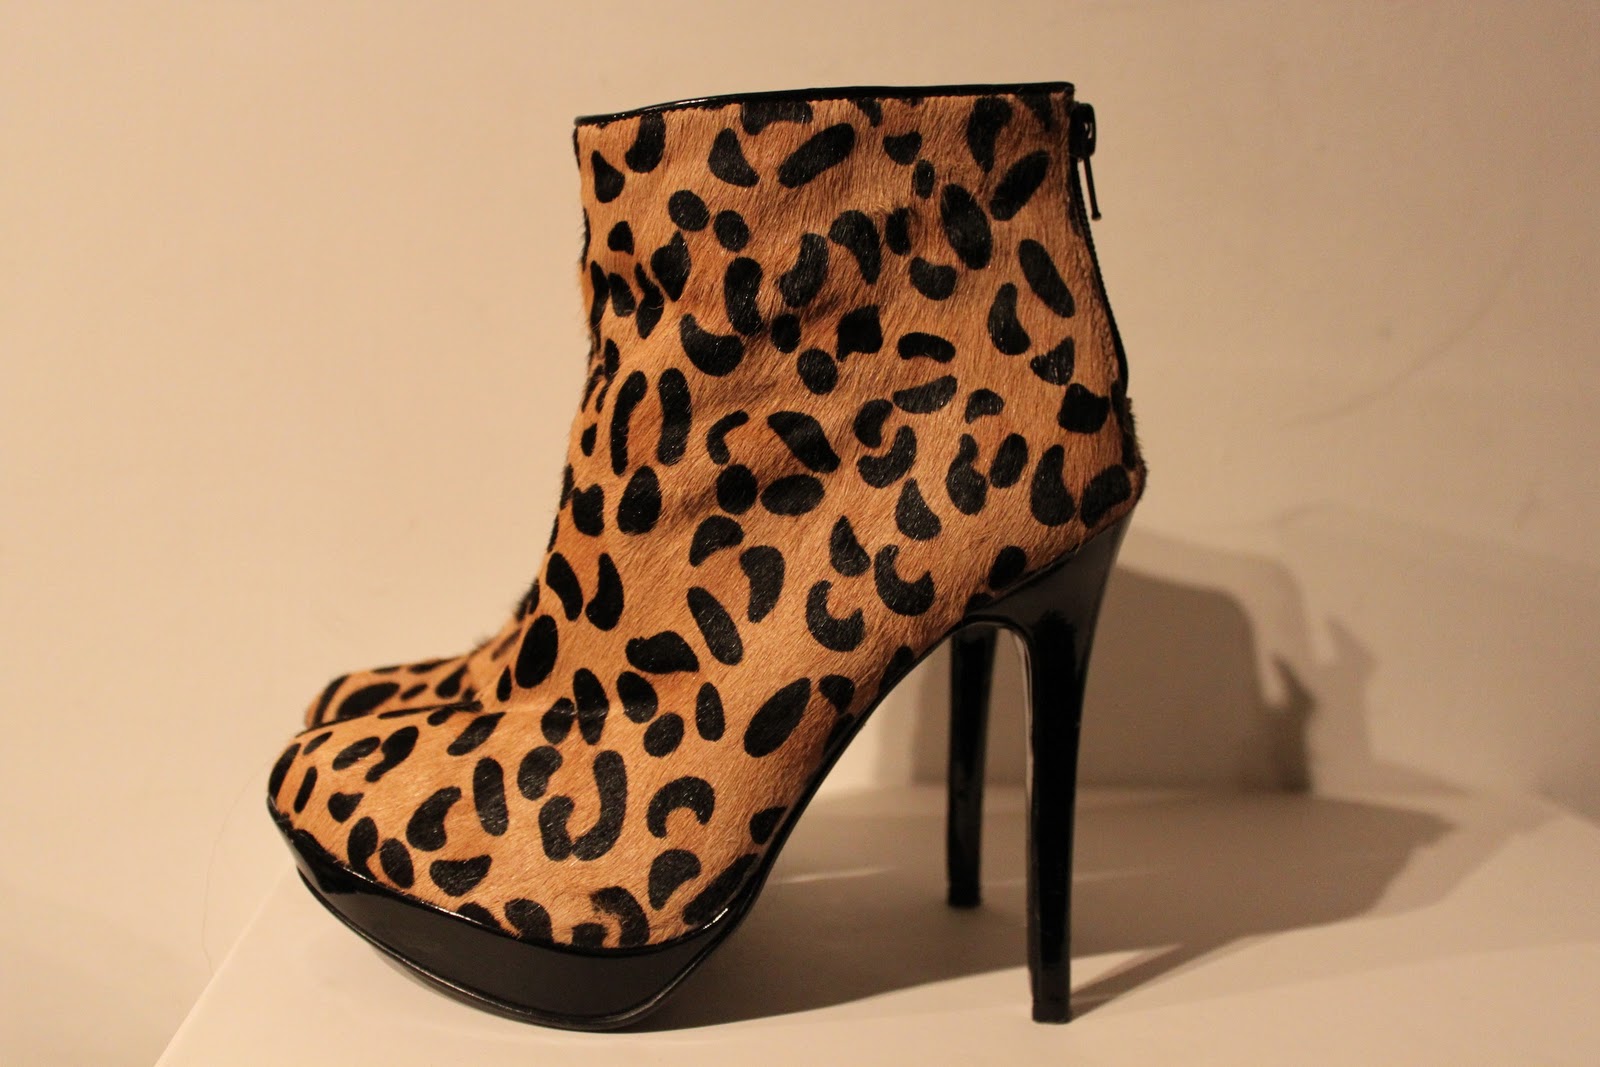 shop 5 inch and up: Leopard print fur ankle boots uk 5 eur 38